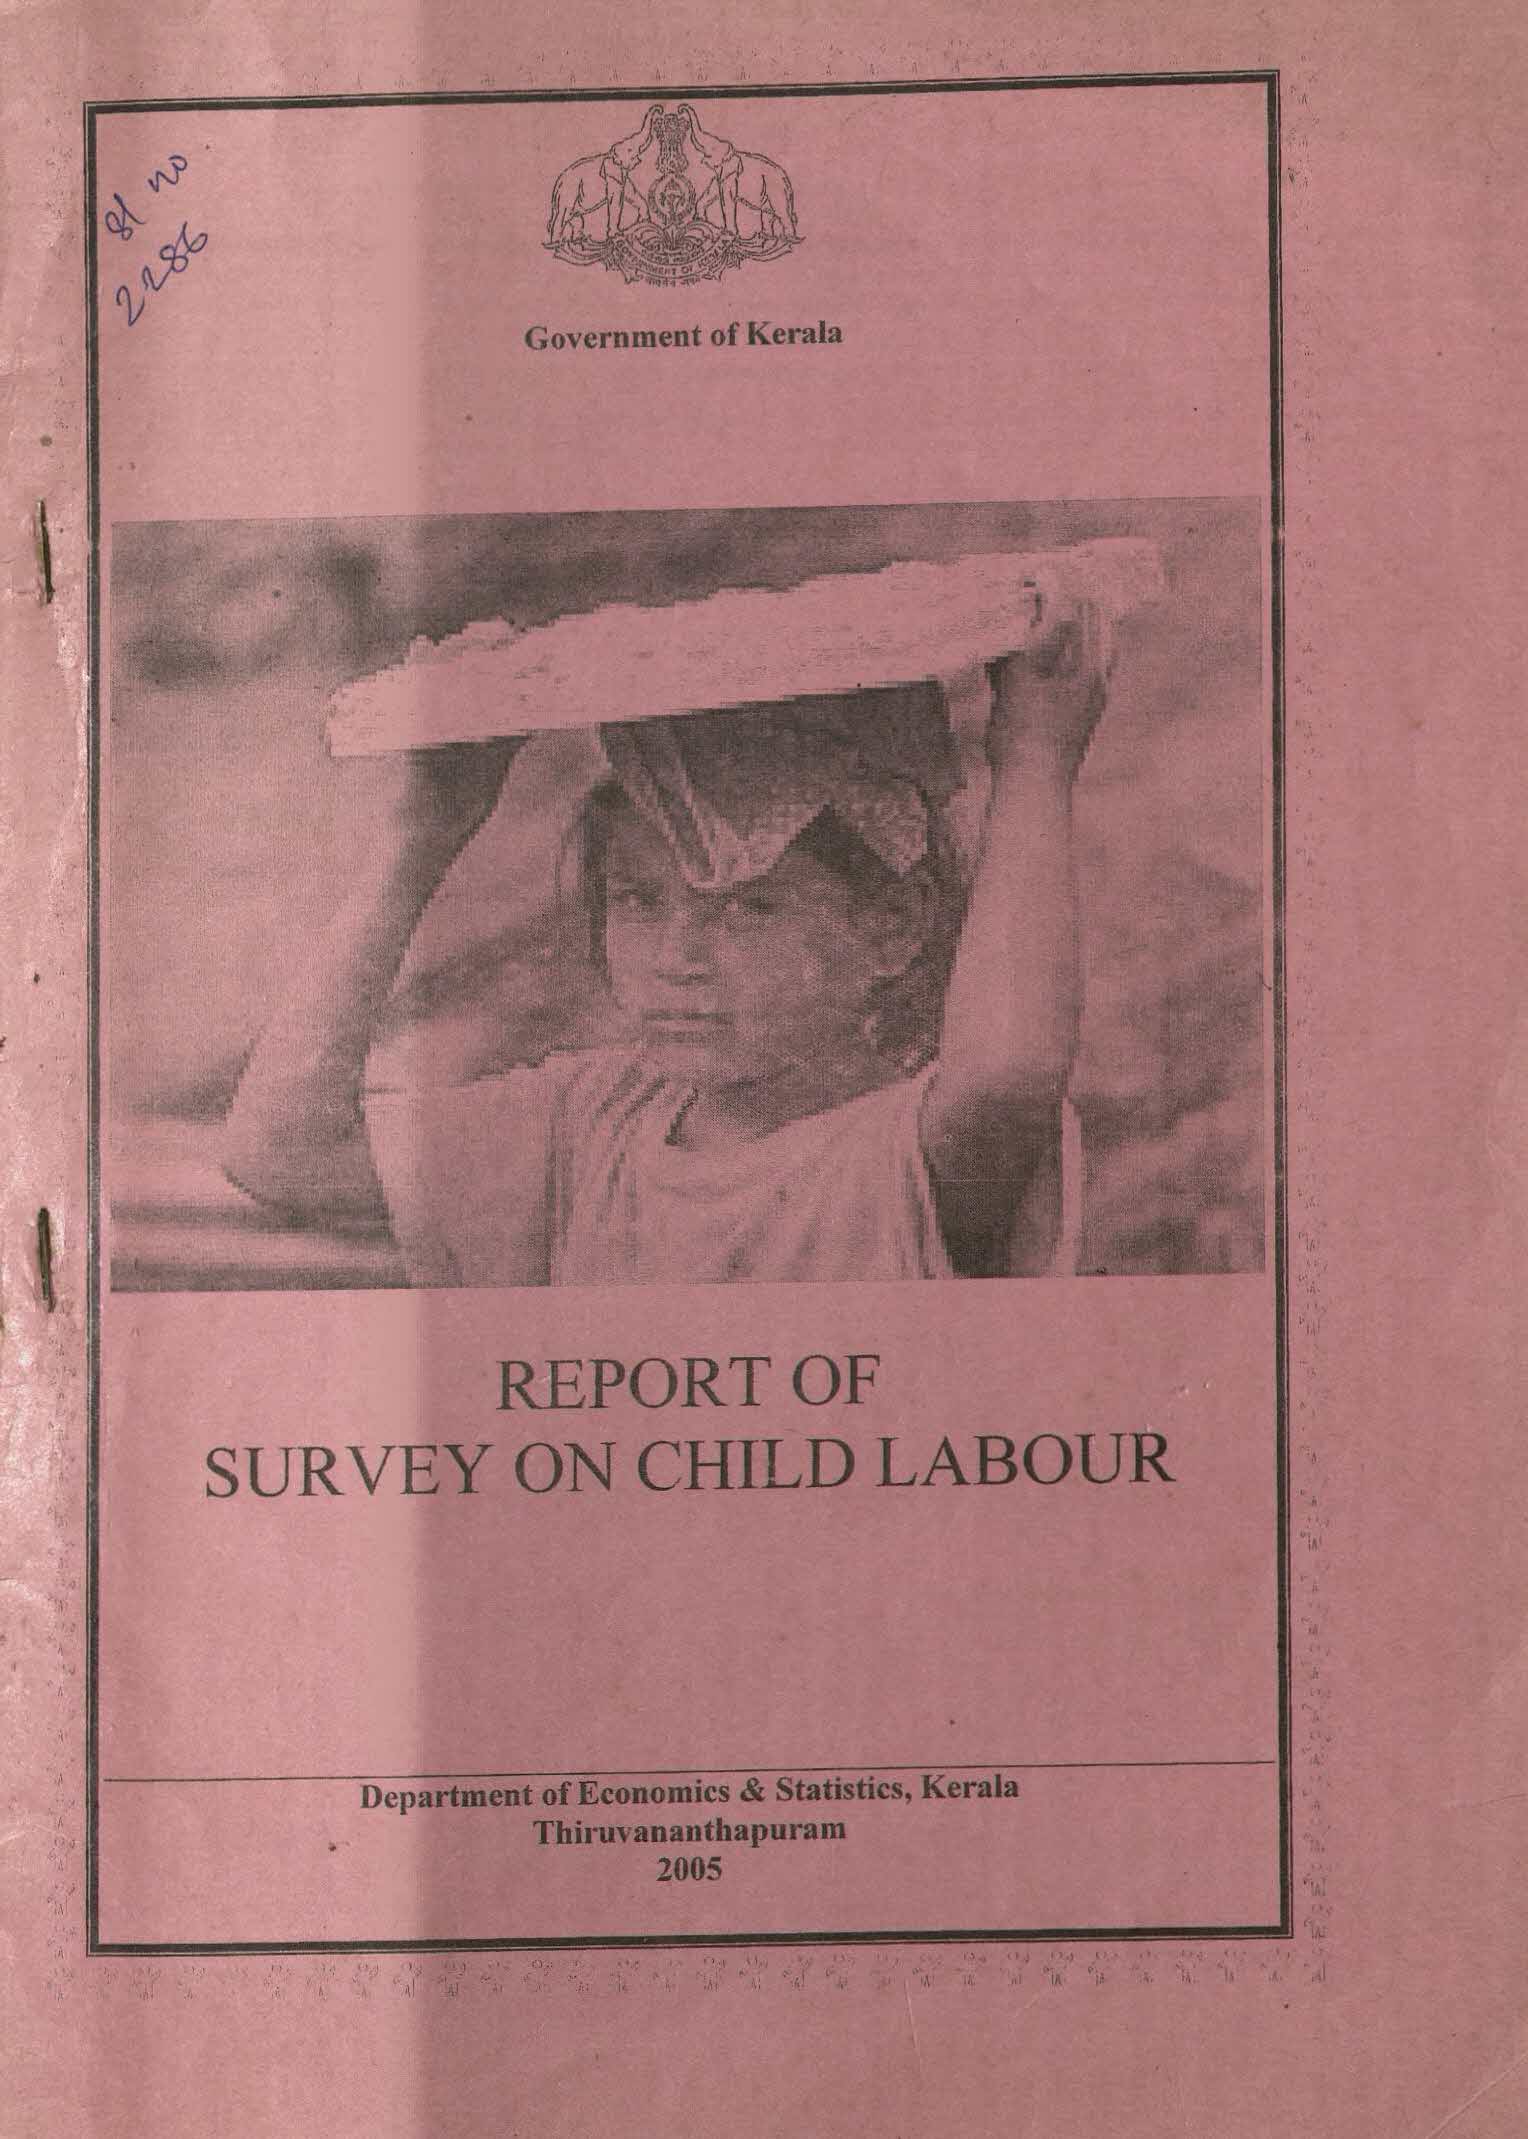 REPORT OF SURVEY ON CHILD LABOUR 2005